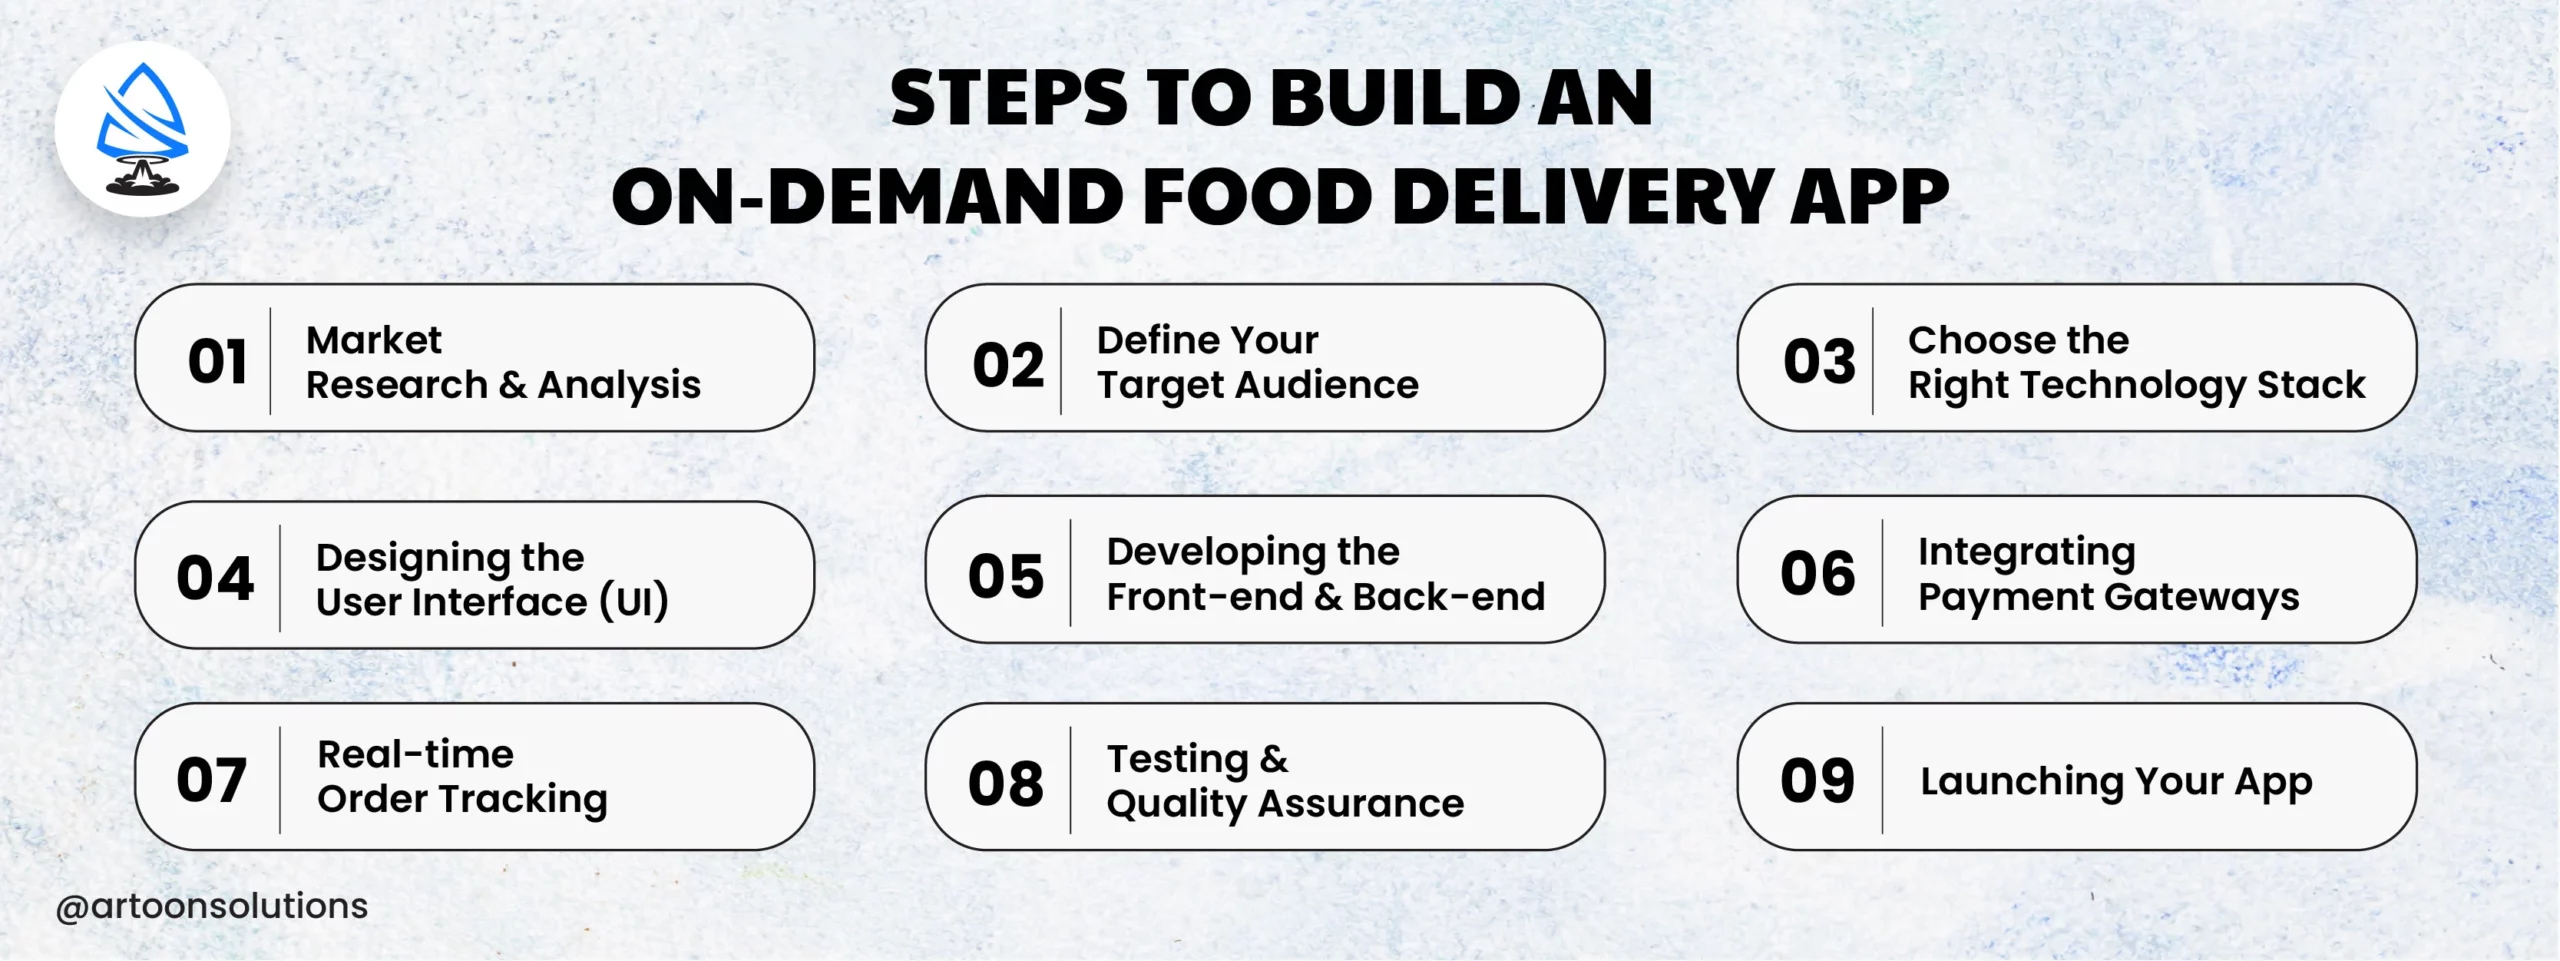 Steps to Build an On-Demand Food Delivery App